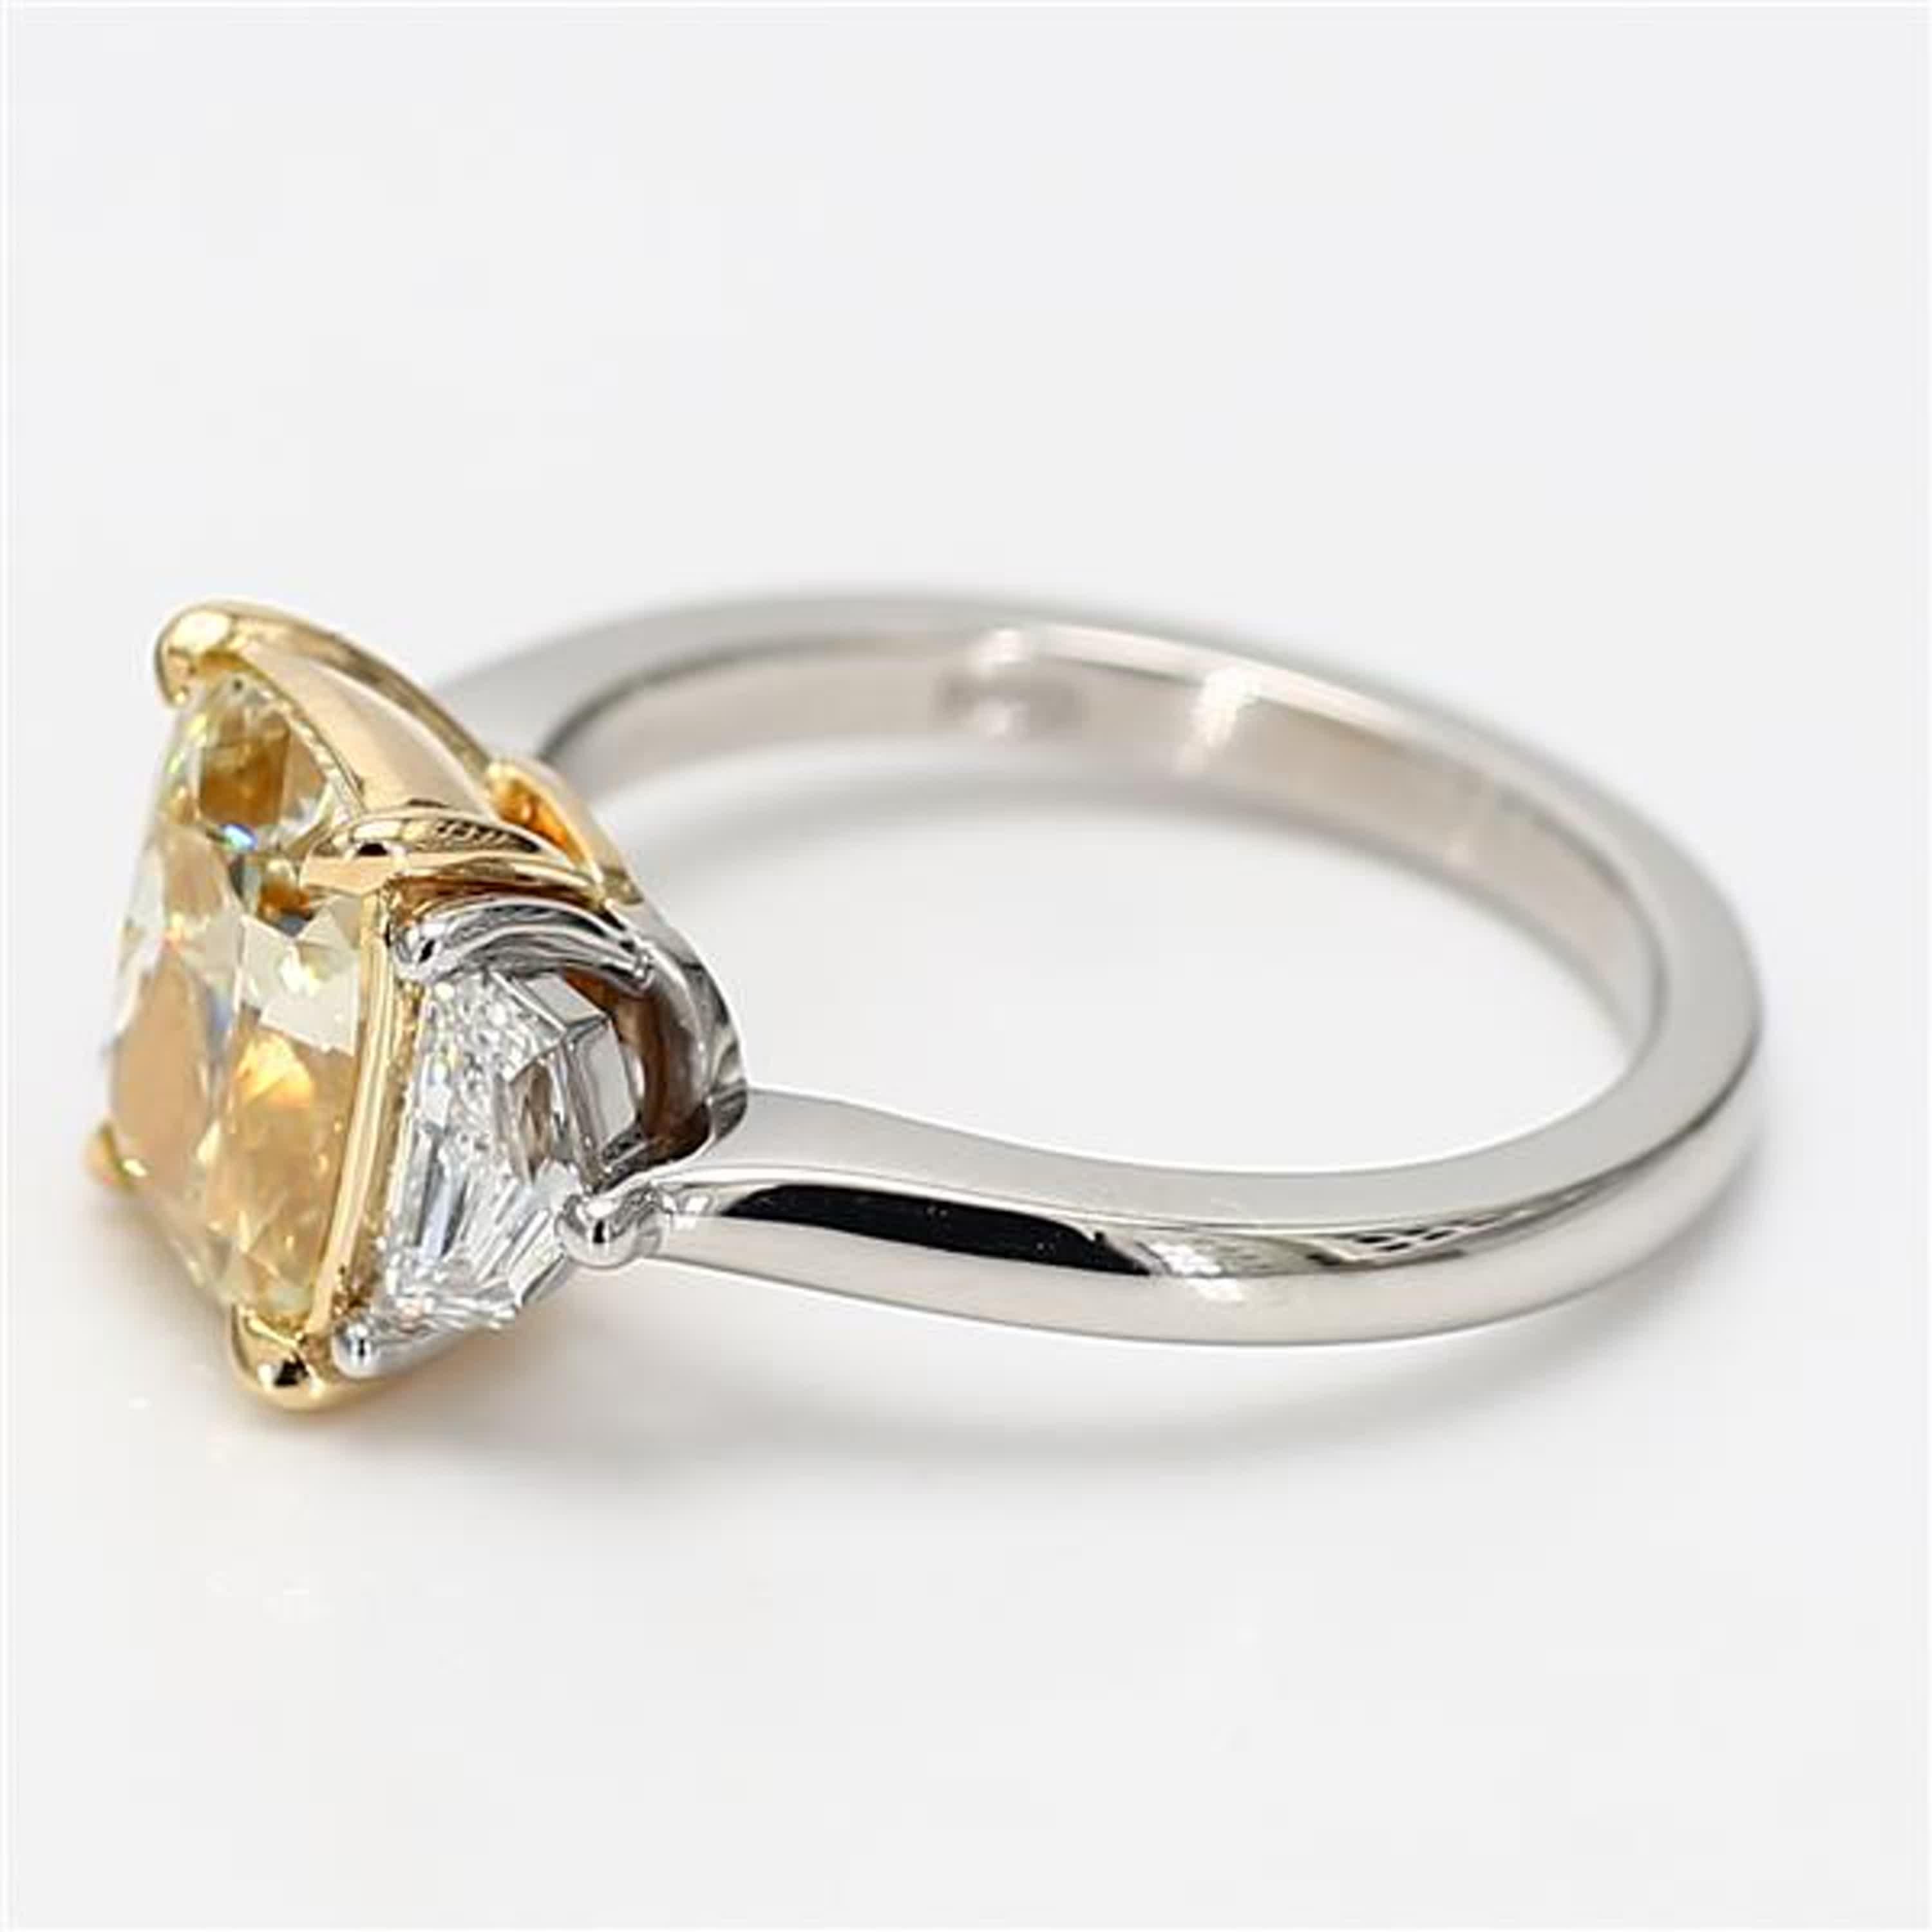 Contemporary GIA Certified Natural Yellow Cushion Diamond 3.54 Carat TW Plat Cocktail Ring For Sale